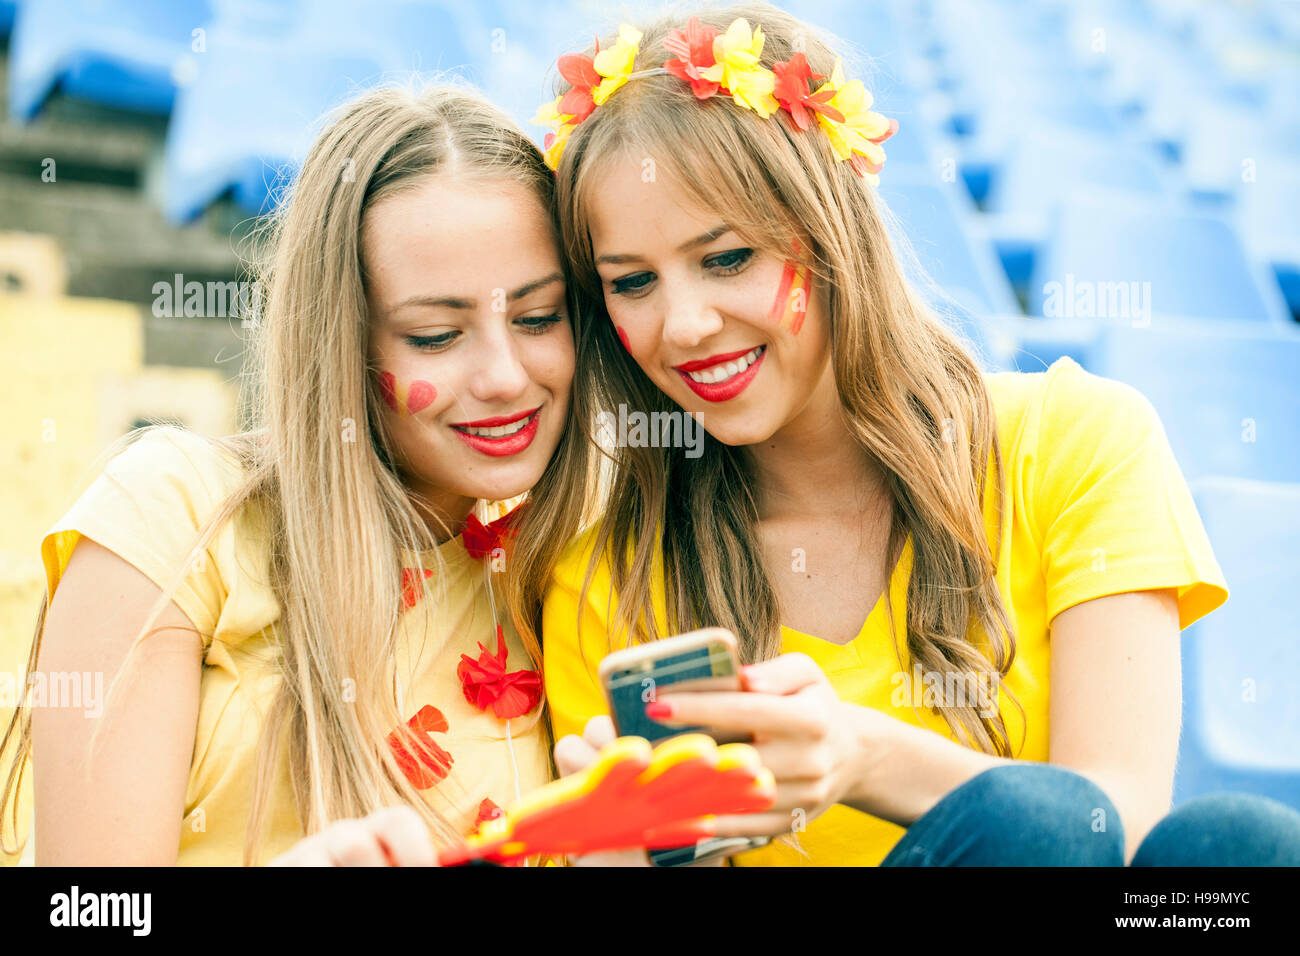 Two female soccer fans text messaging in stadium Stock Photo